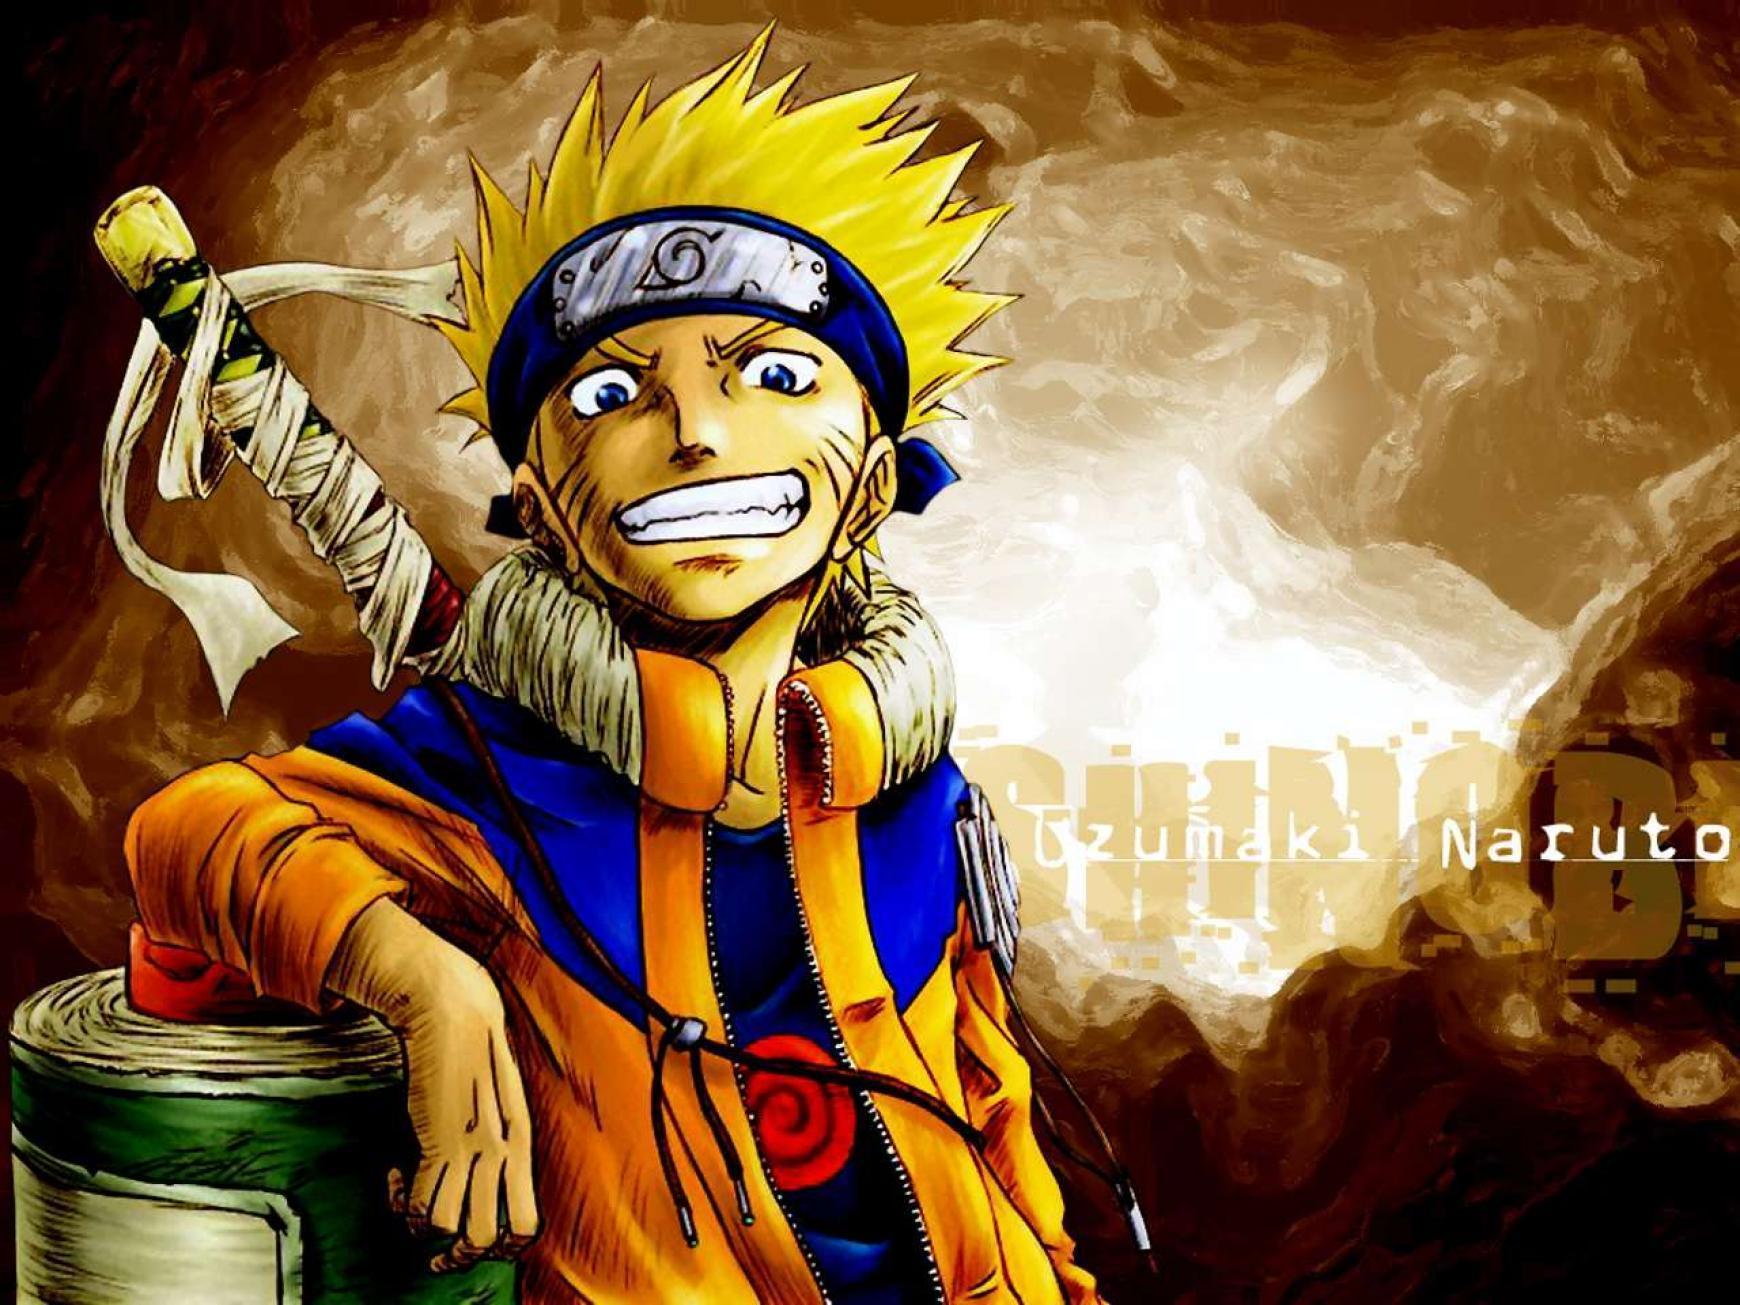 The best Naruto Wallpaper. Share your multimedia